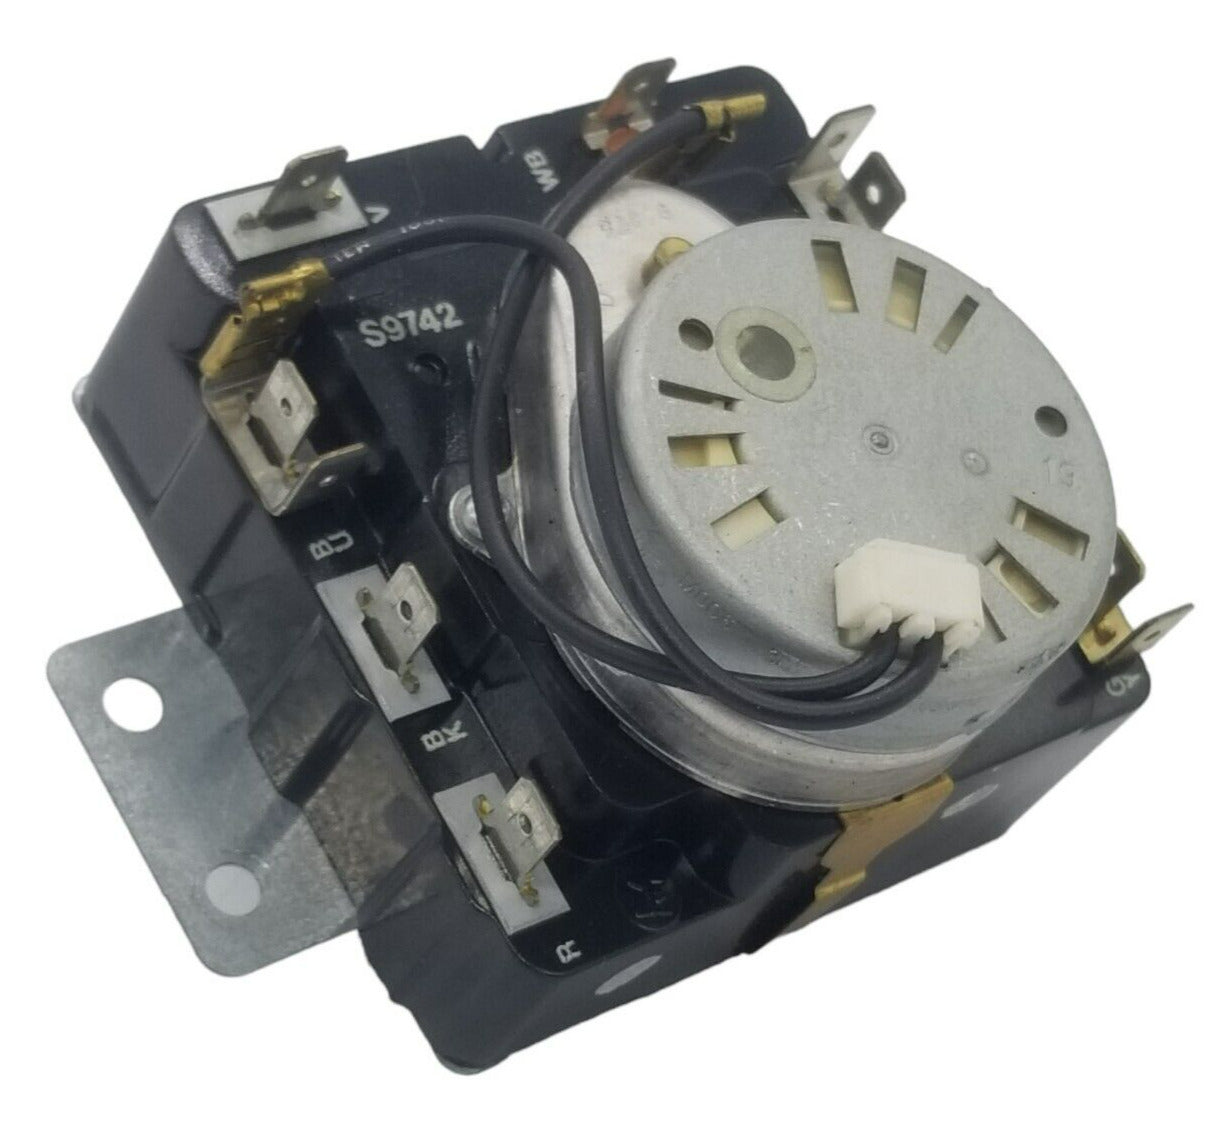 Genuine OEM Replacement for Kenmore Dryer Timer 3406019B